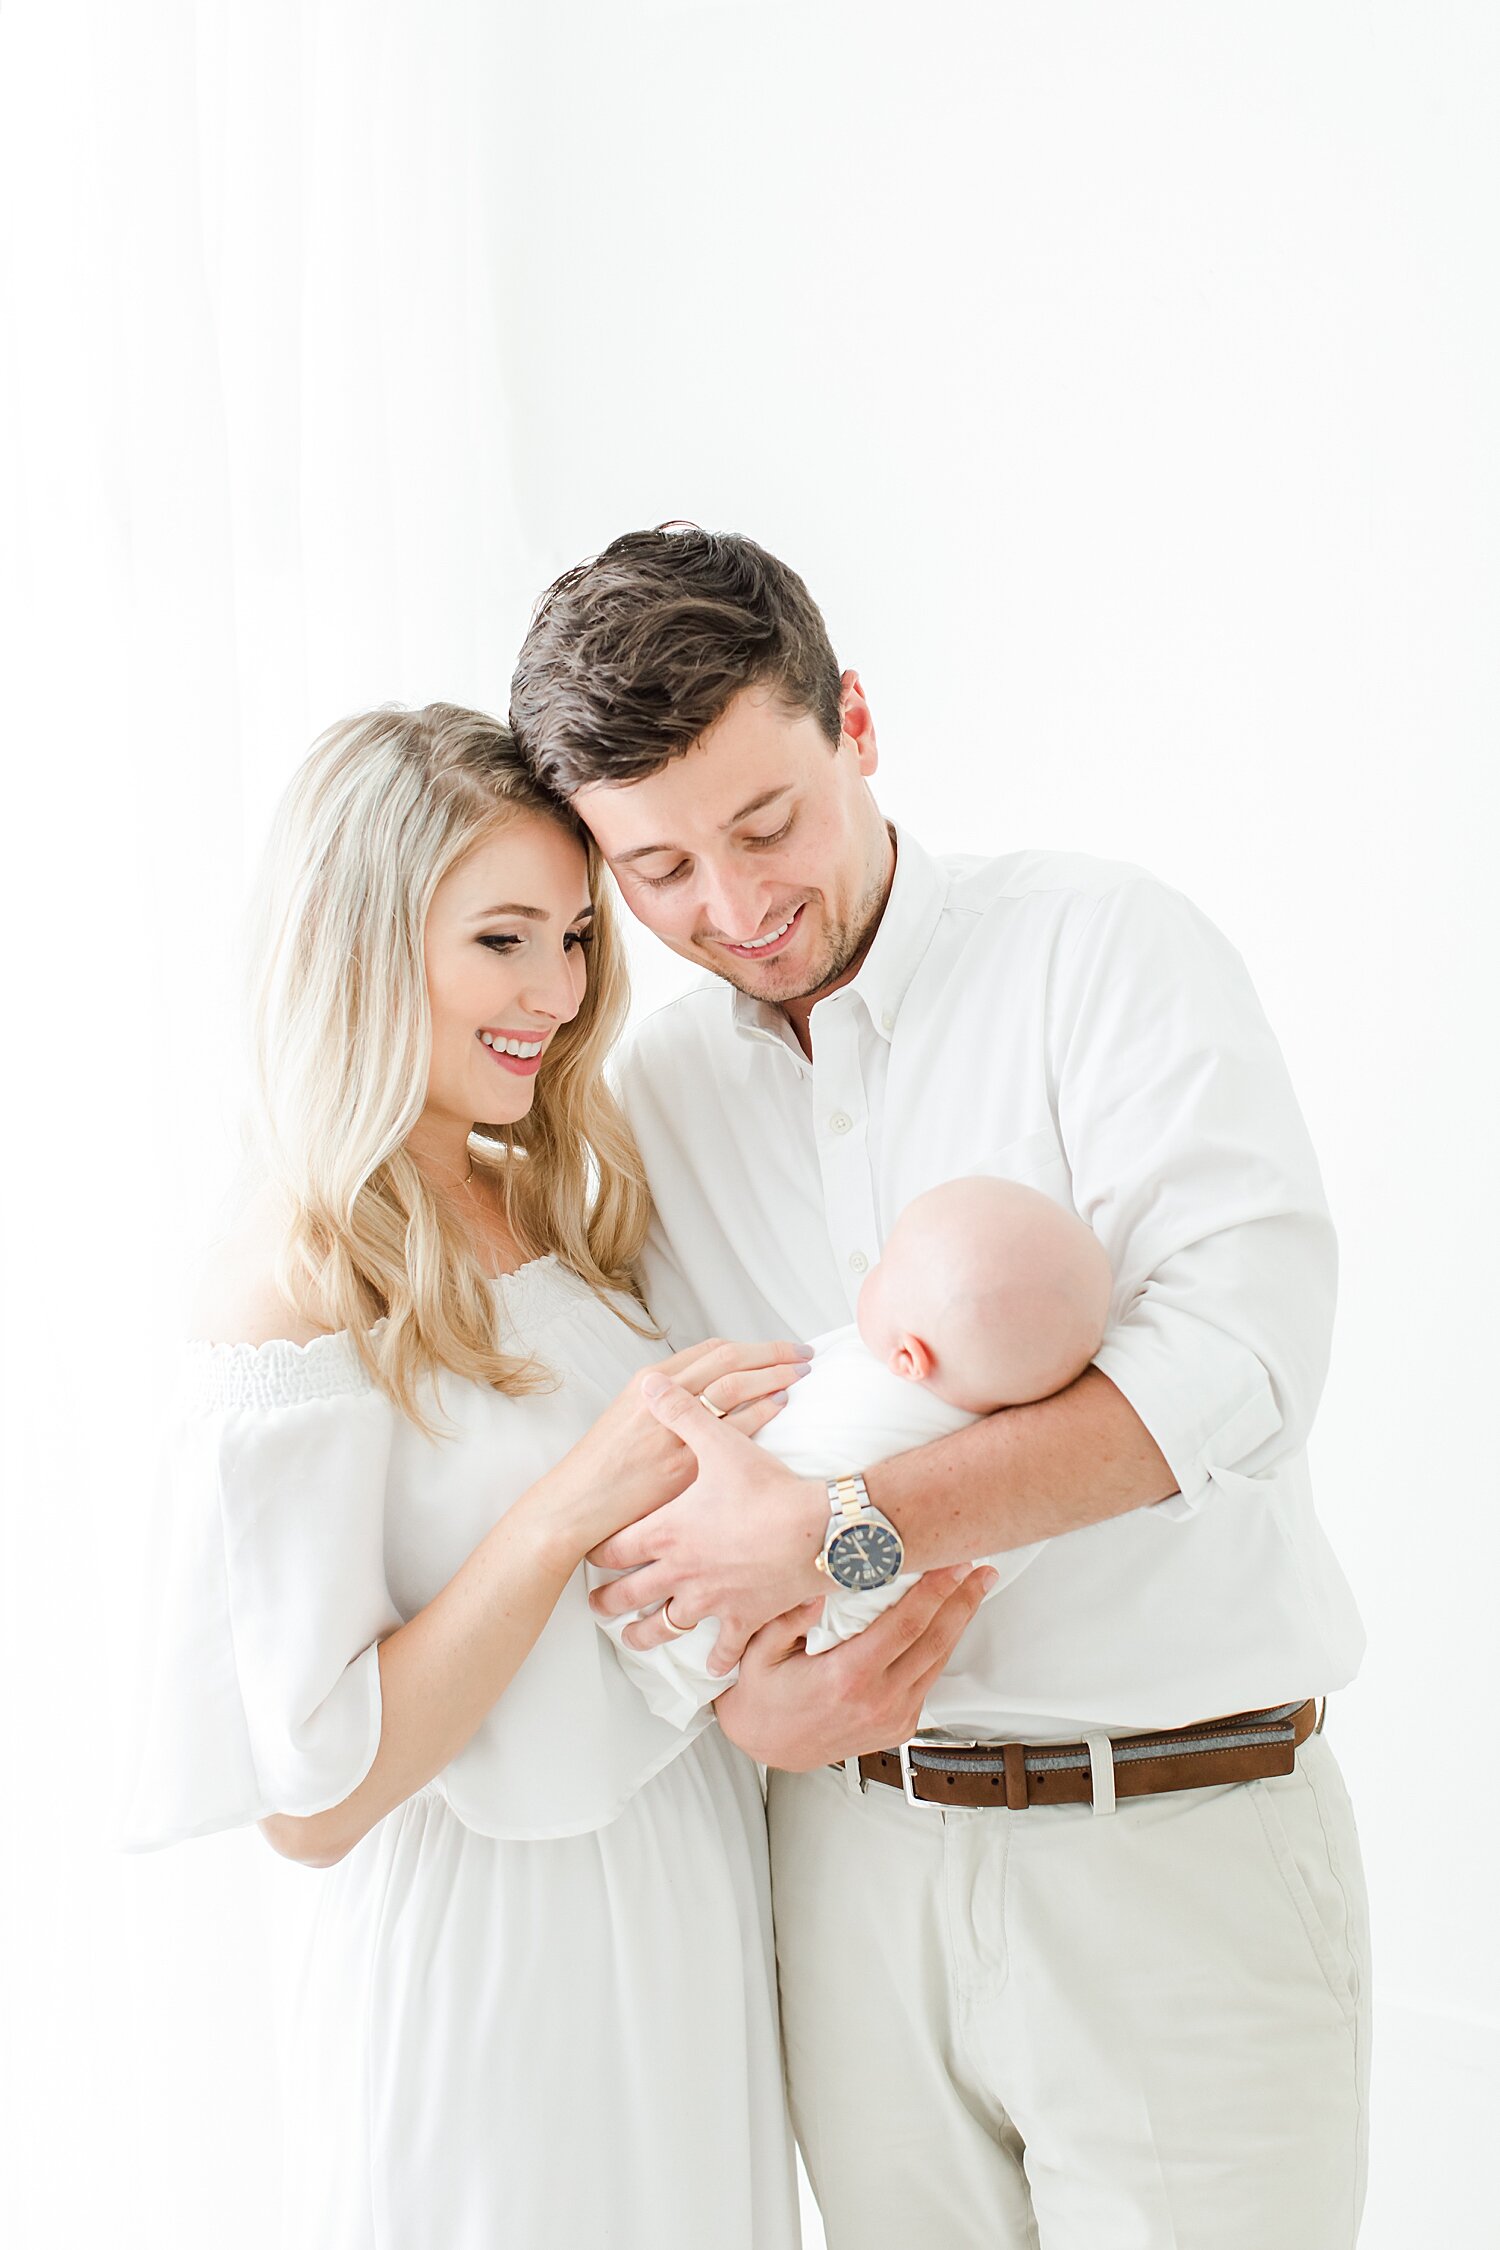 First time parents with baby girl in Darien, CT Newborn Studio. Photos by Kristin Wood Photography. 